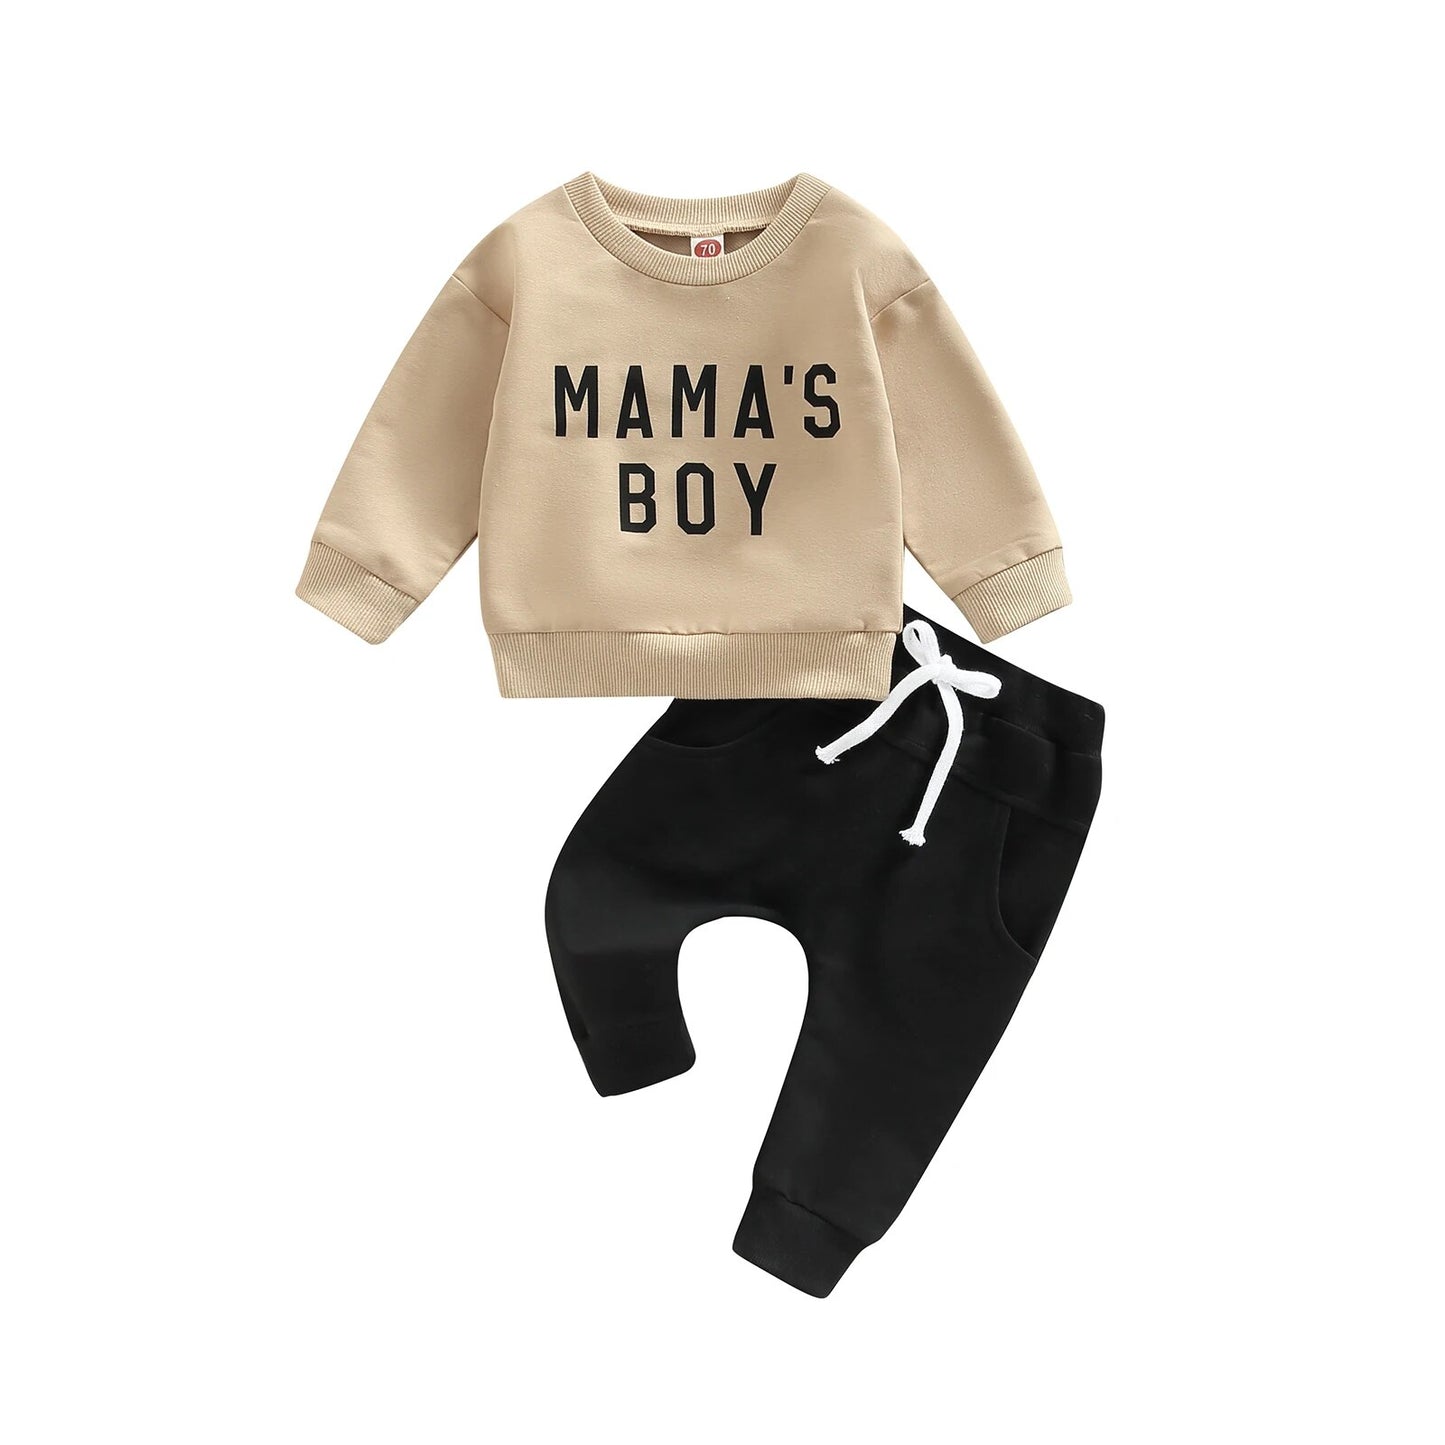 👼Mama's Boy Baby Outfit's